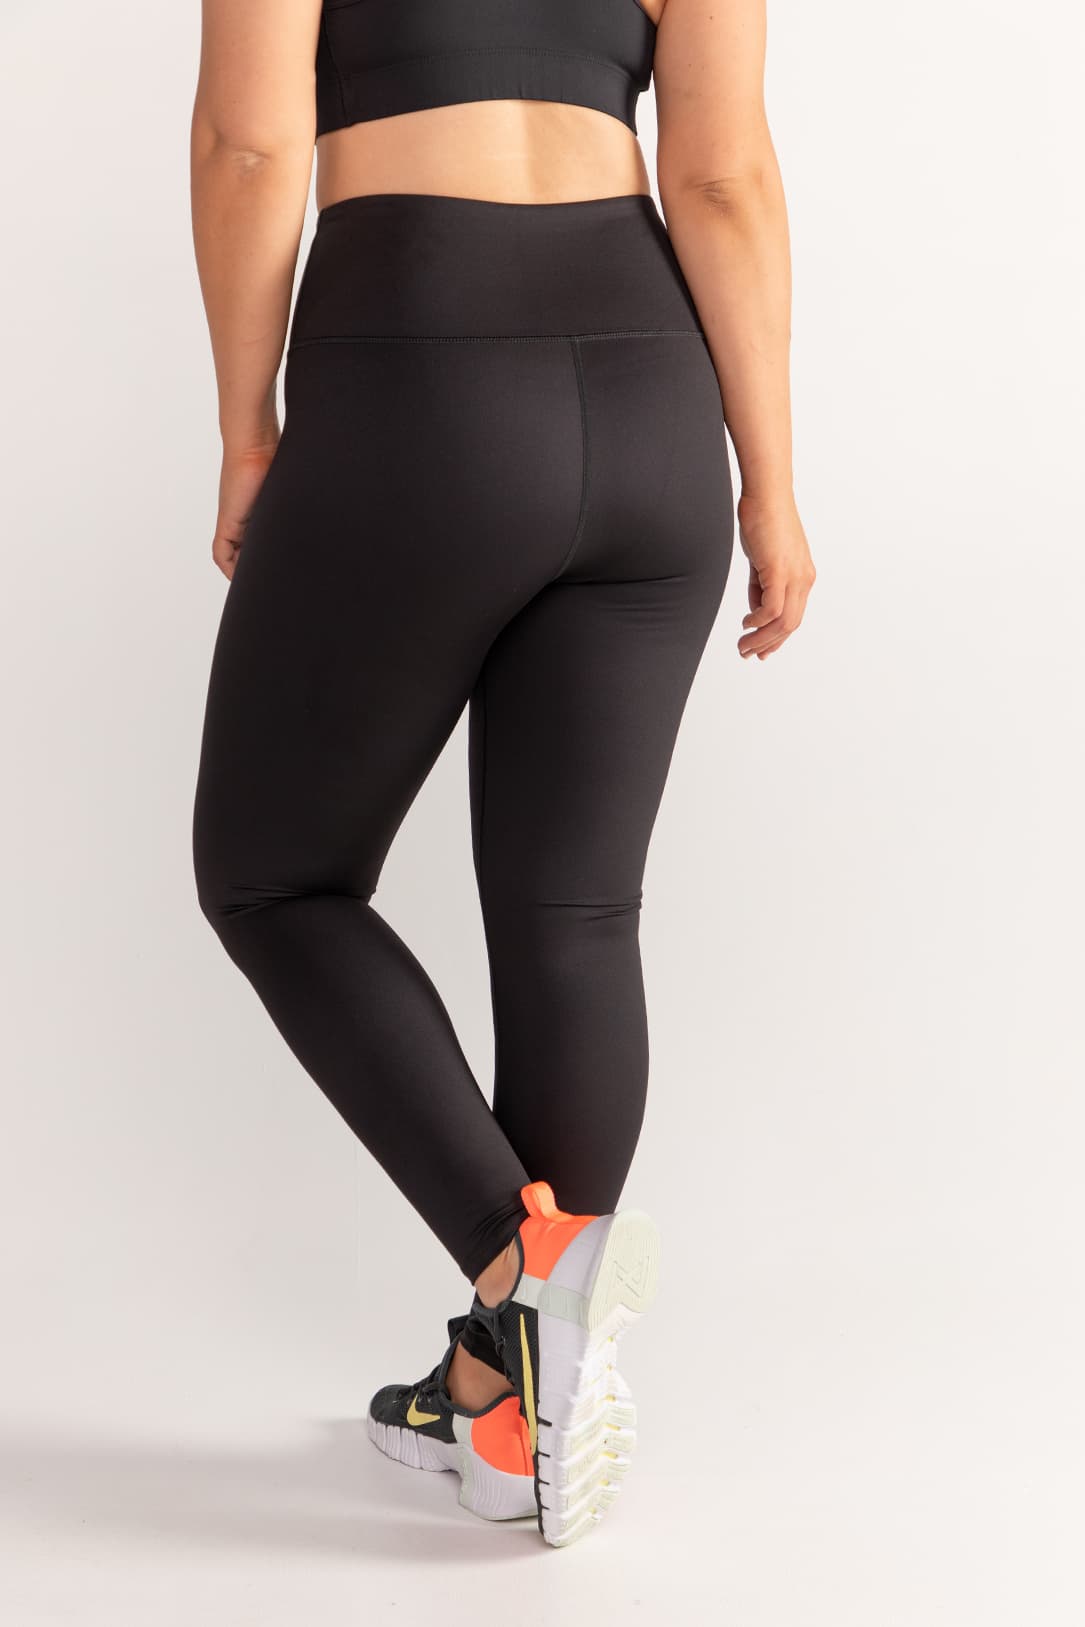 Womens HIIT Black Essential Branded Gym Legging Compression Sports Bottoms  XS-XL